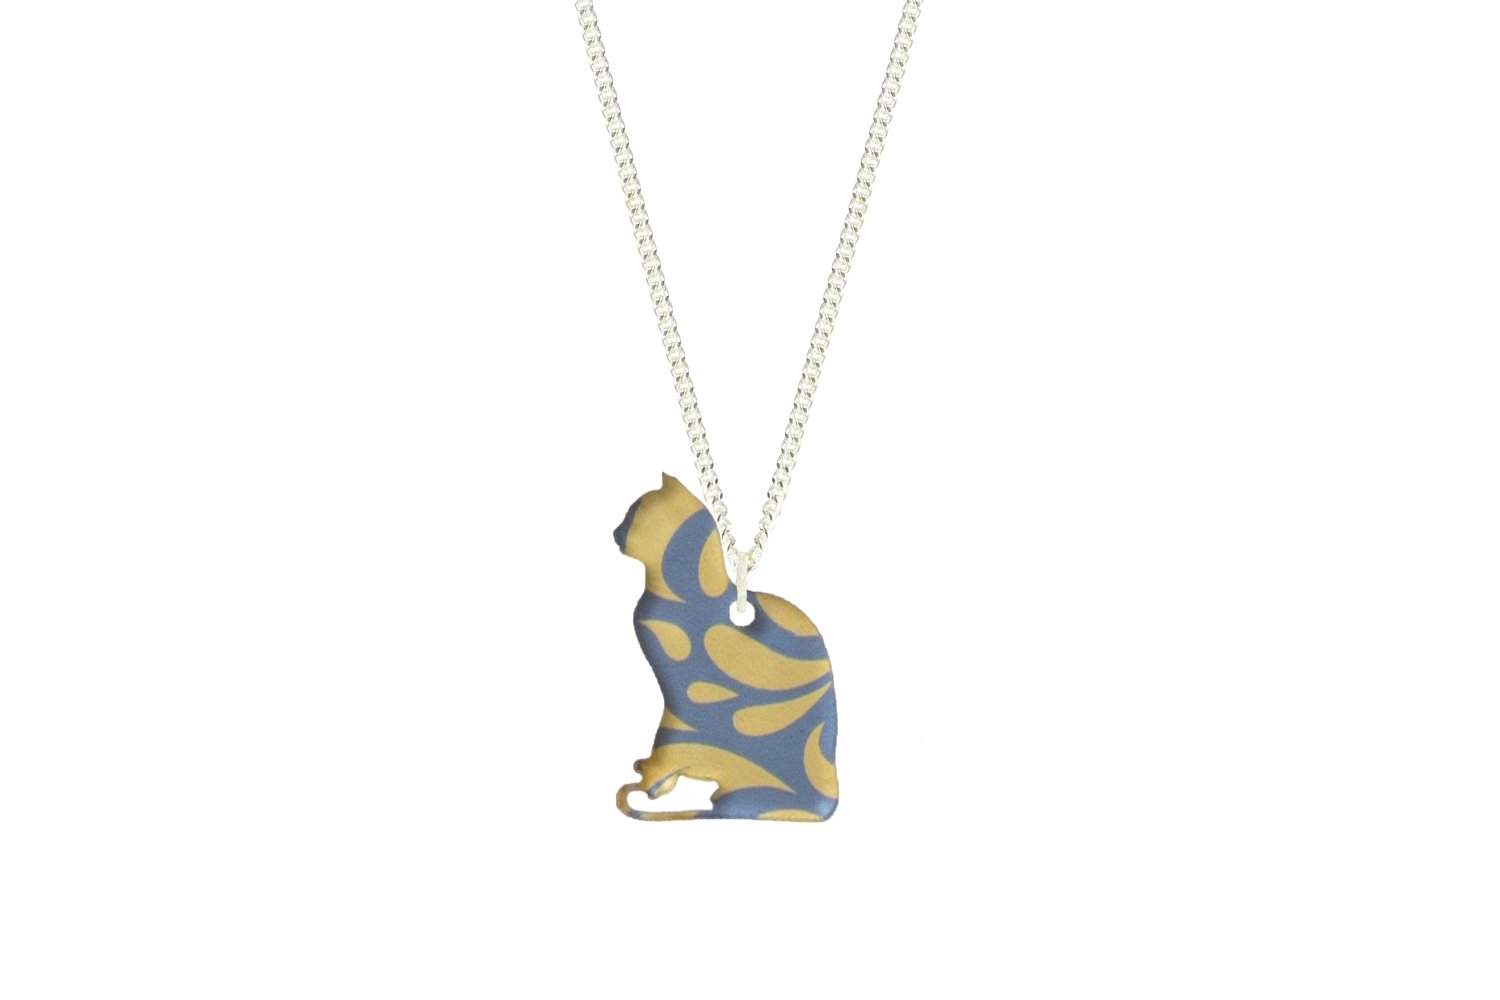 Cat Pendant Sculpted Style on Chain Necklace